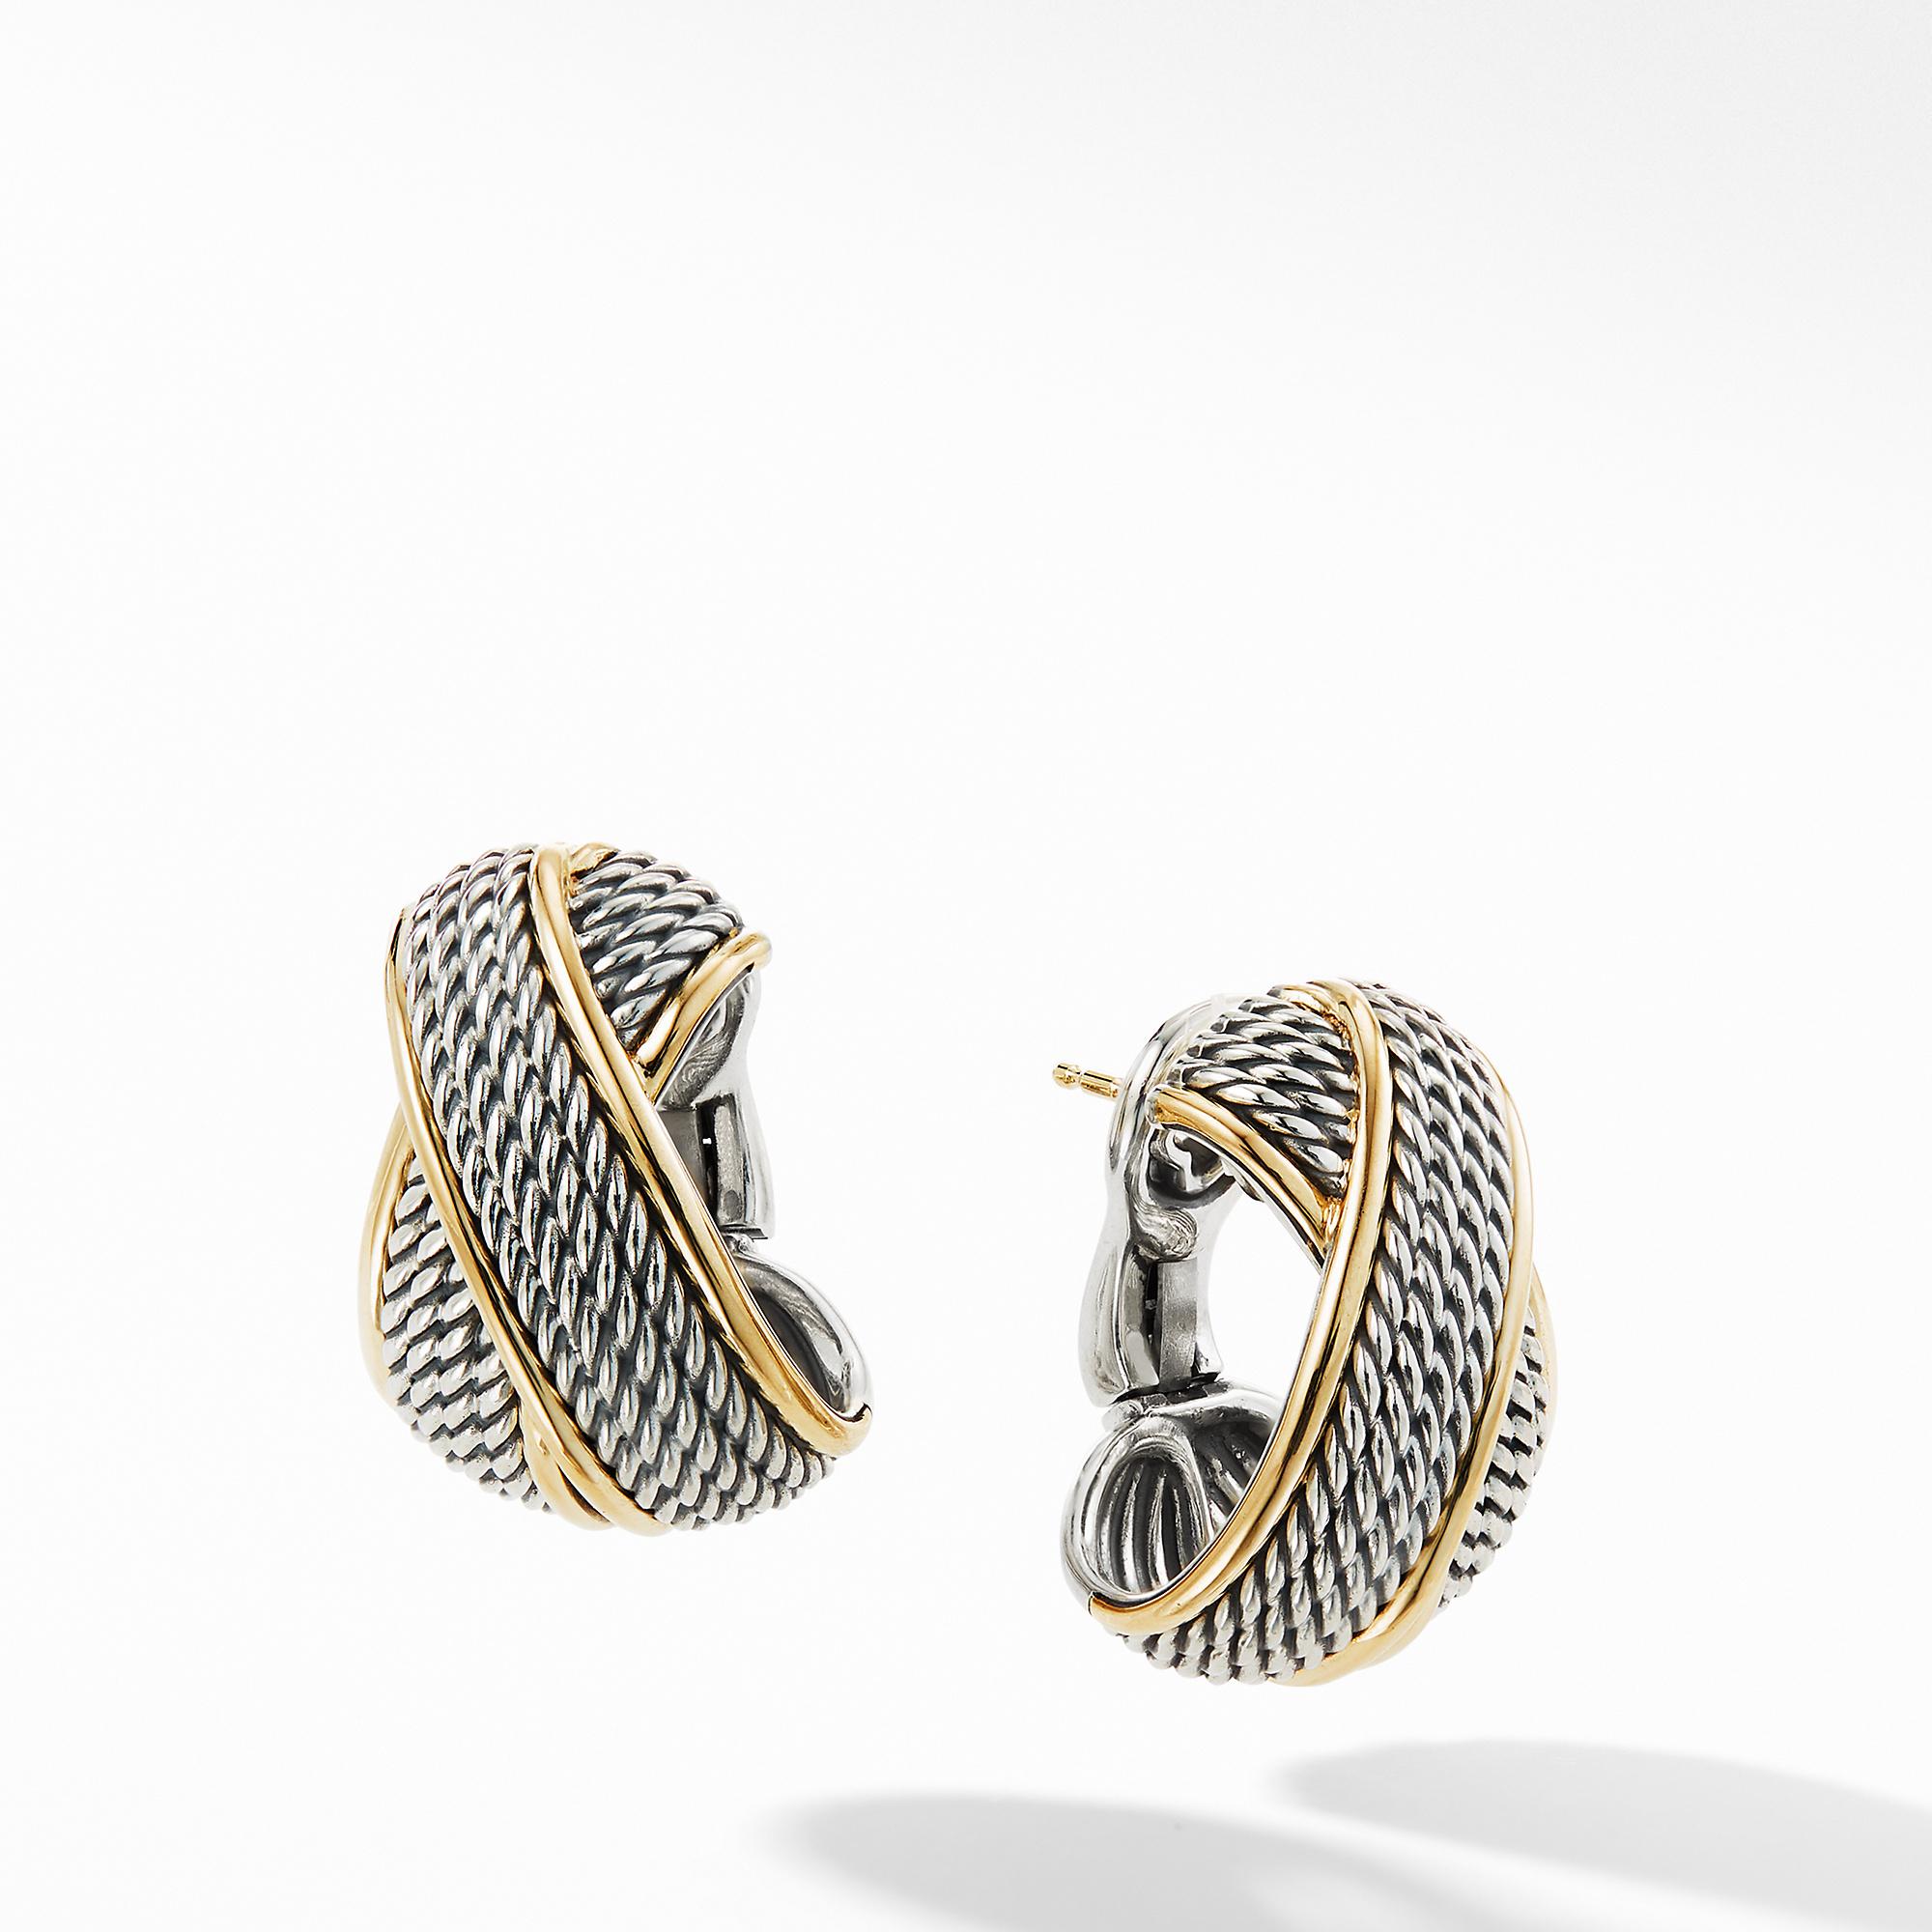 David Yurman DY Origami Crossover Shrimp Earrings with 18k Yellow Gold